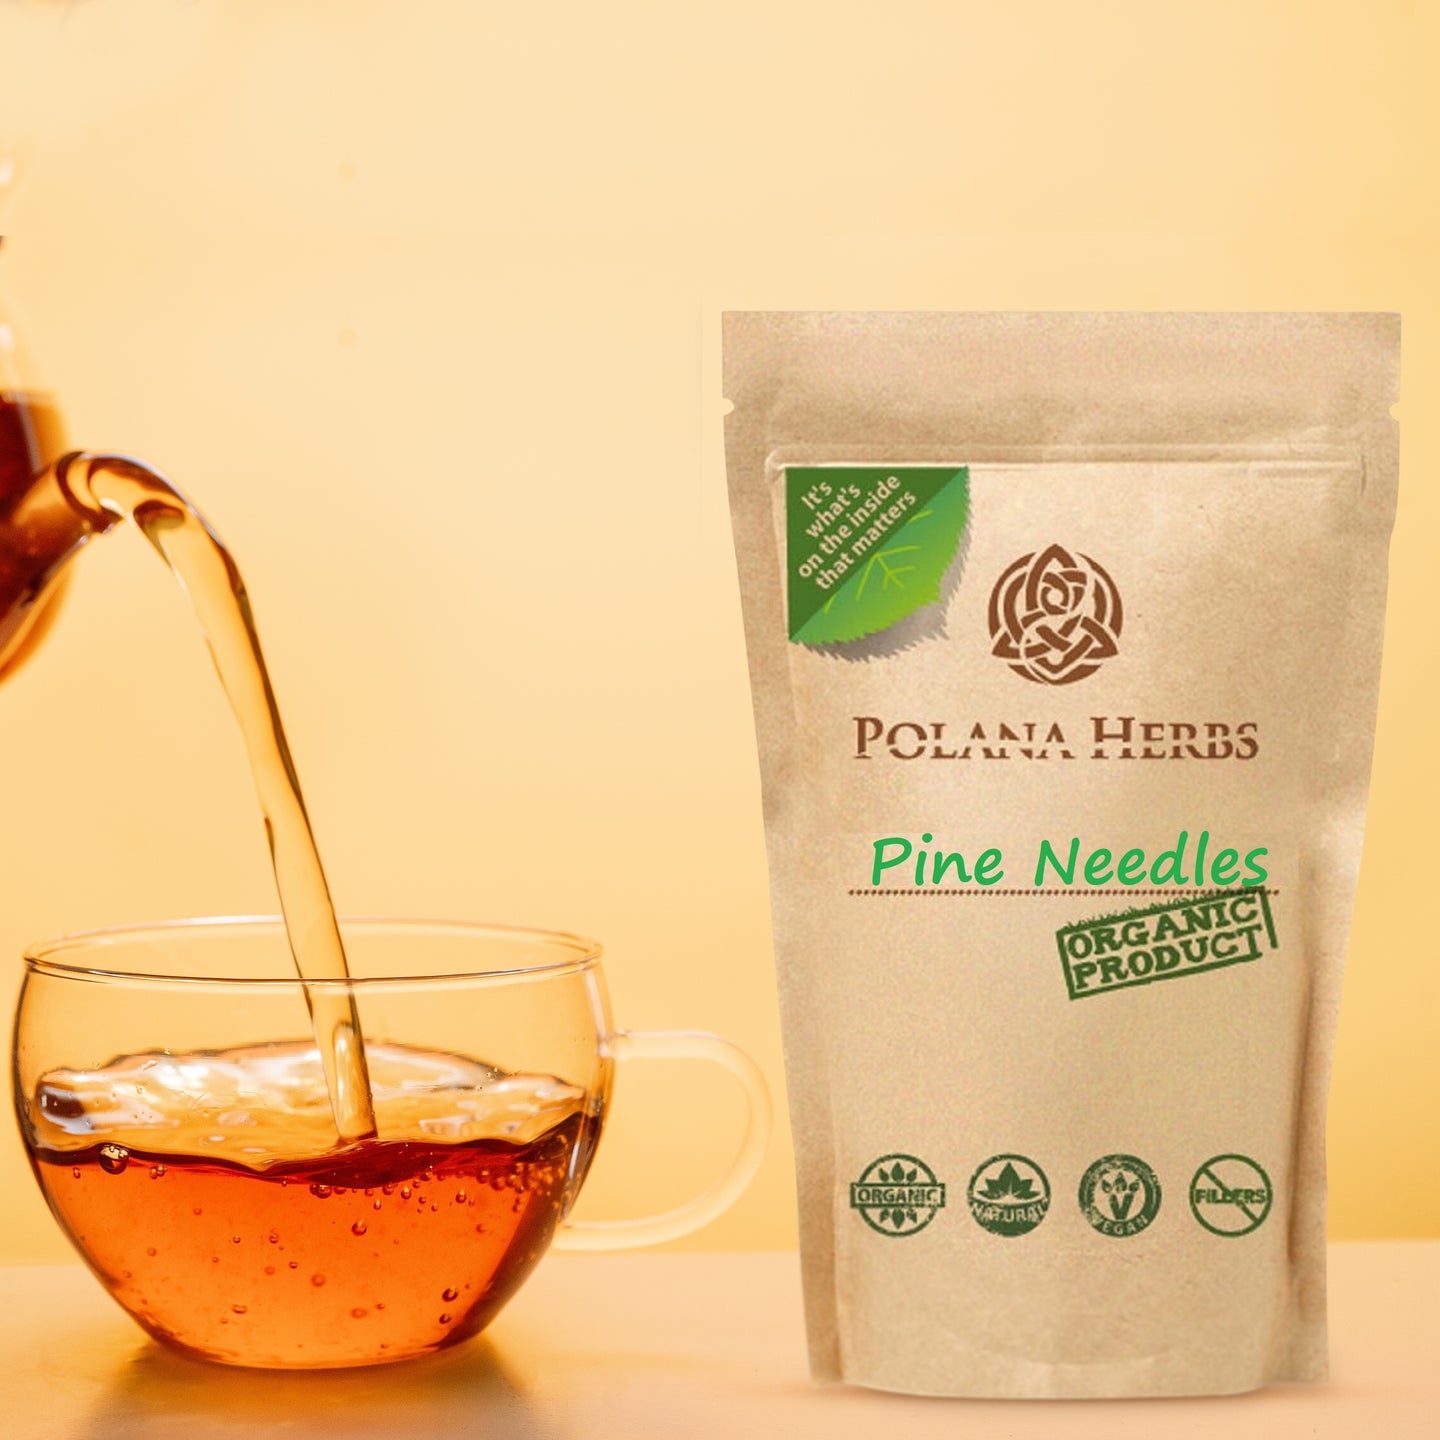 Pine Needle Tea Organic Loose Leaf (Pinus sylvestris) Help with respiratory problems, high in vitamin C and A, rich in antioxidants - polanaherbs